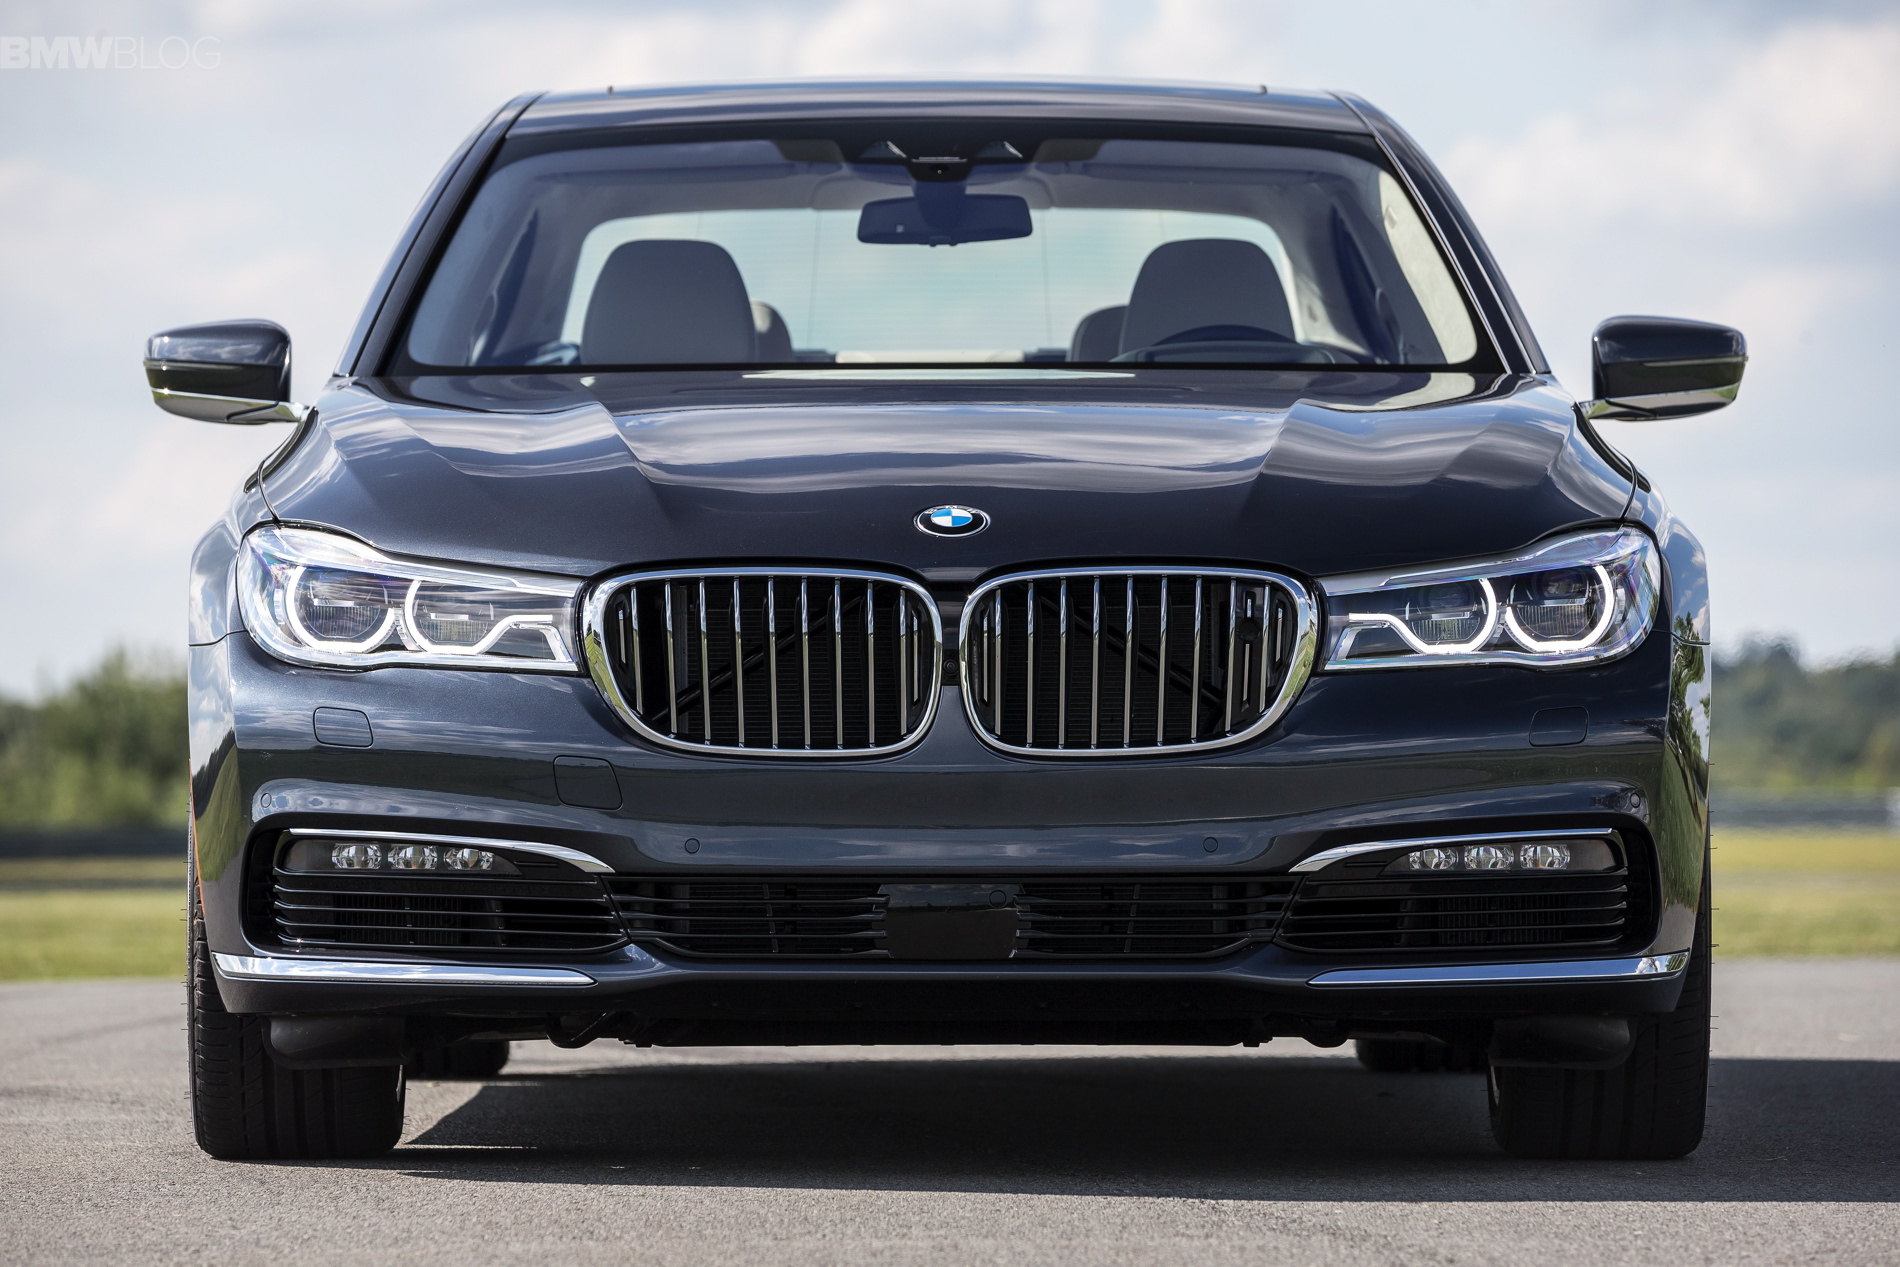 2016 bmw 7 series launch new york images 1900x 1200 43